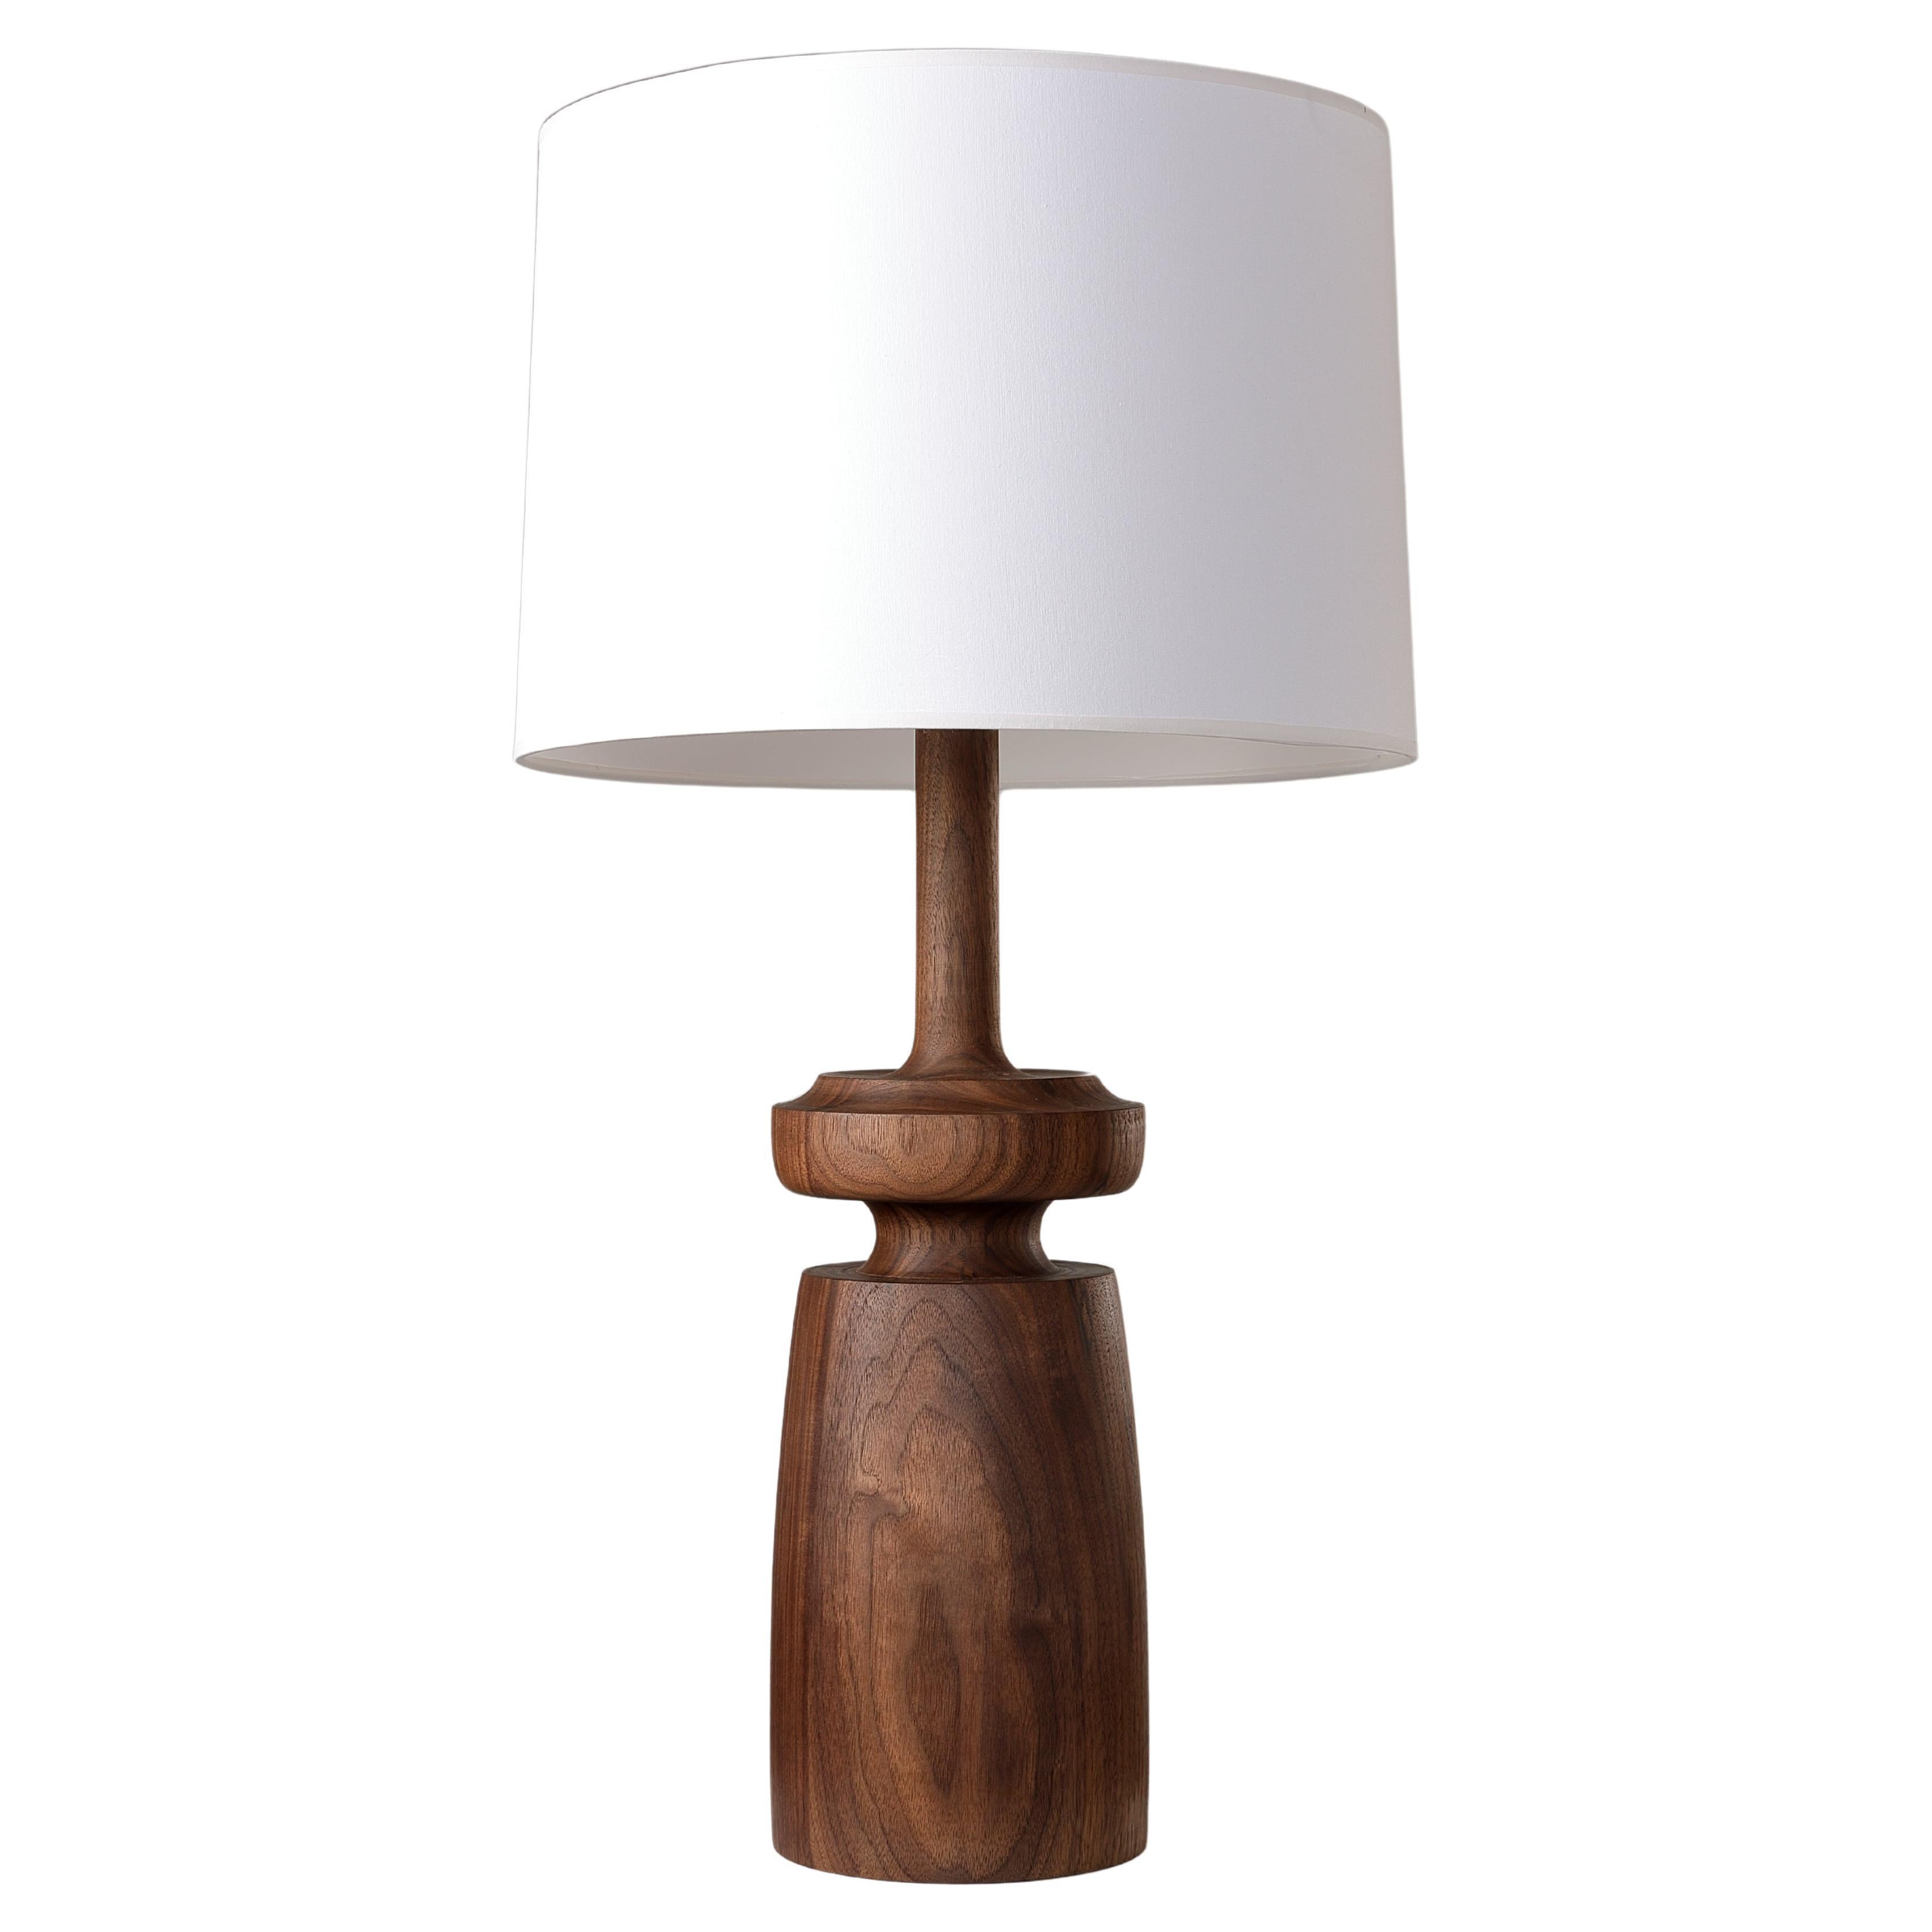 Lathe Turned Walnut Table lamp form TWLF by Michael Rozell, USA 2023 For Sale